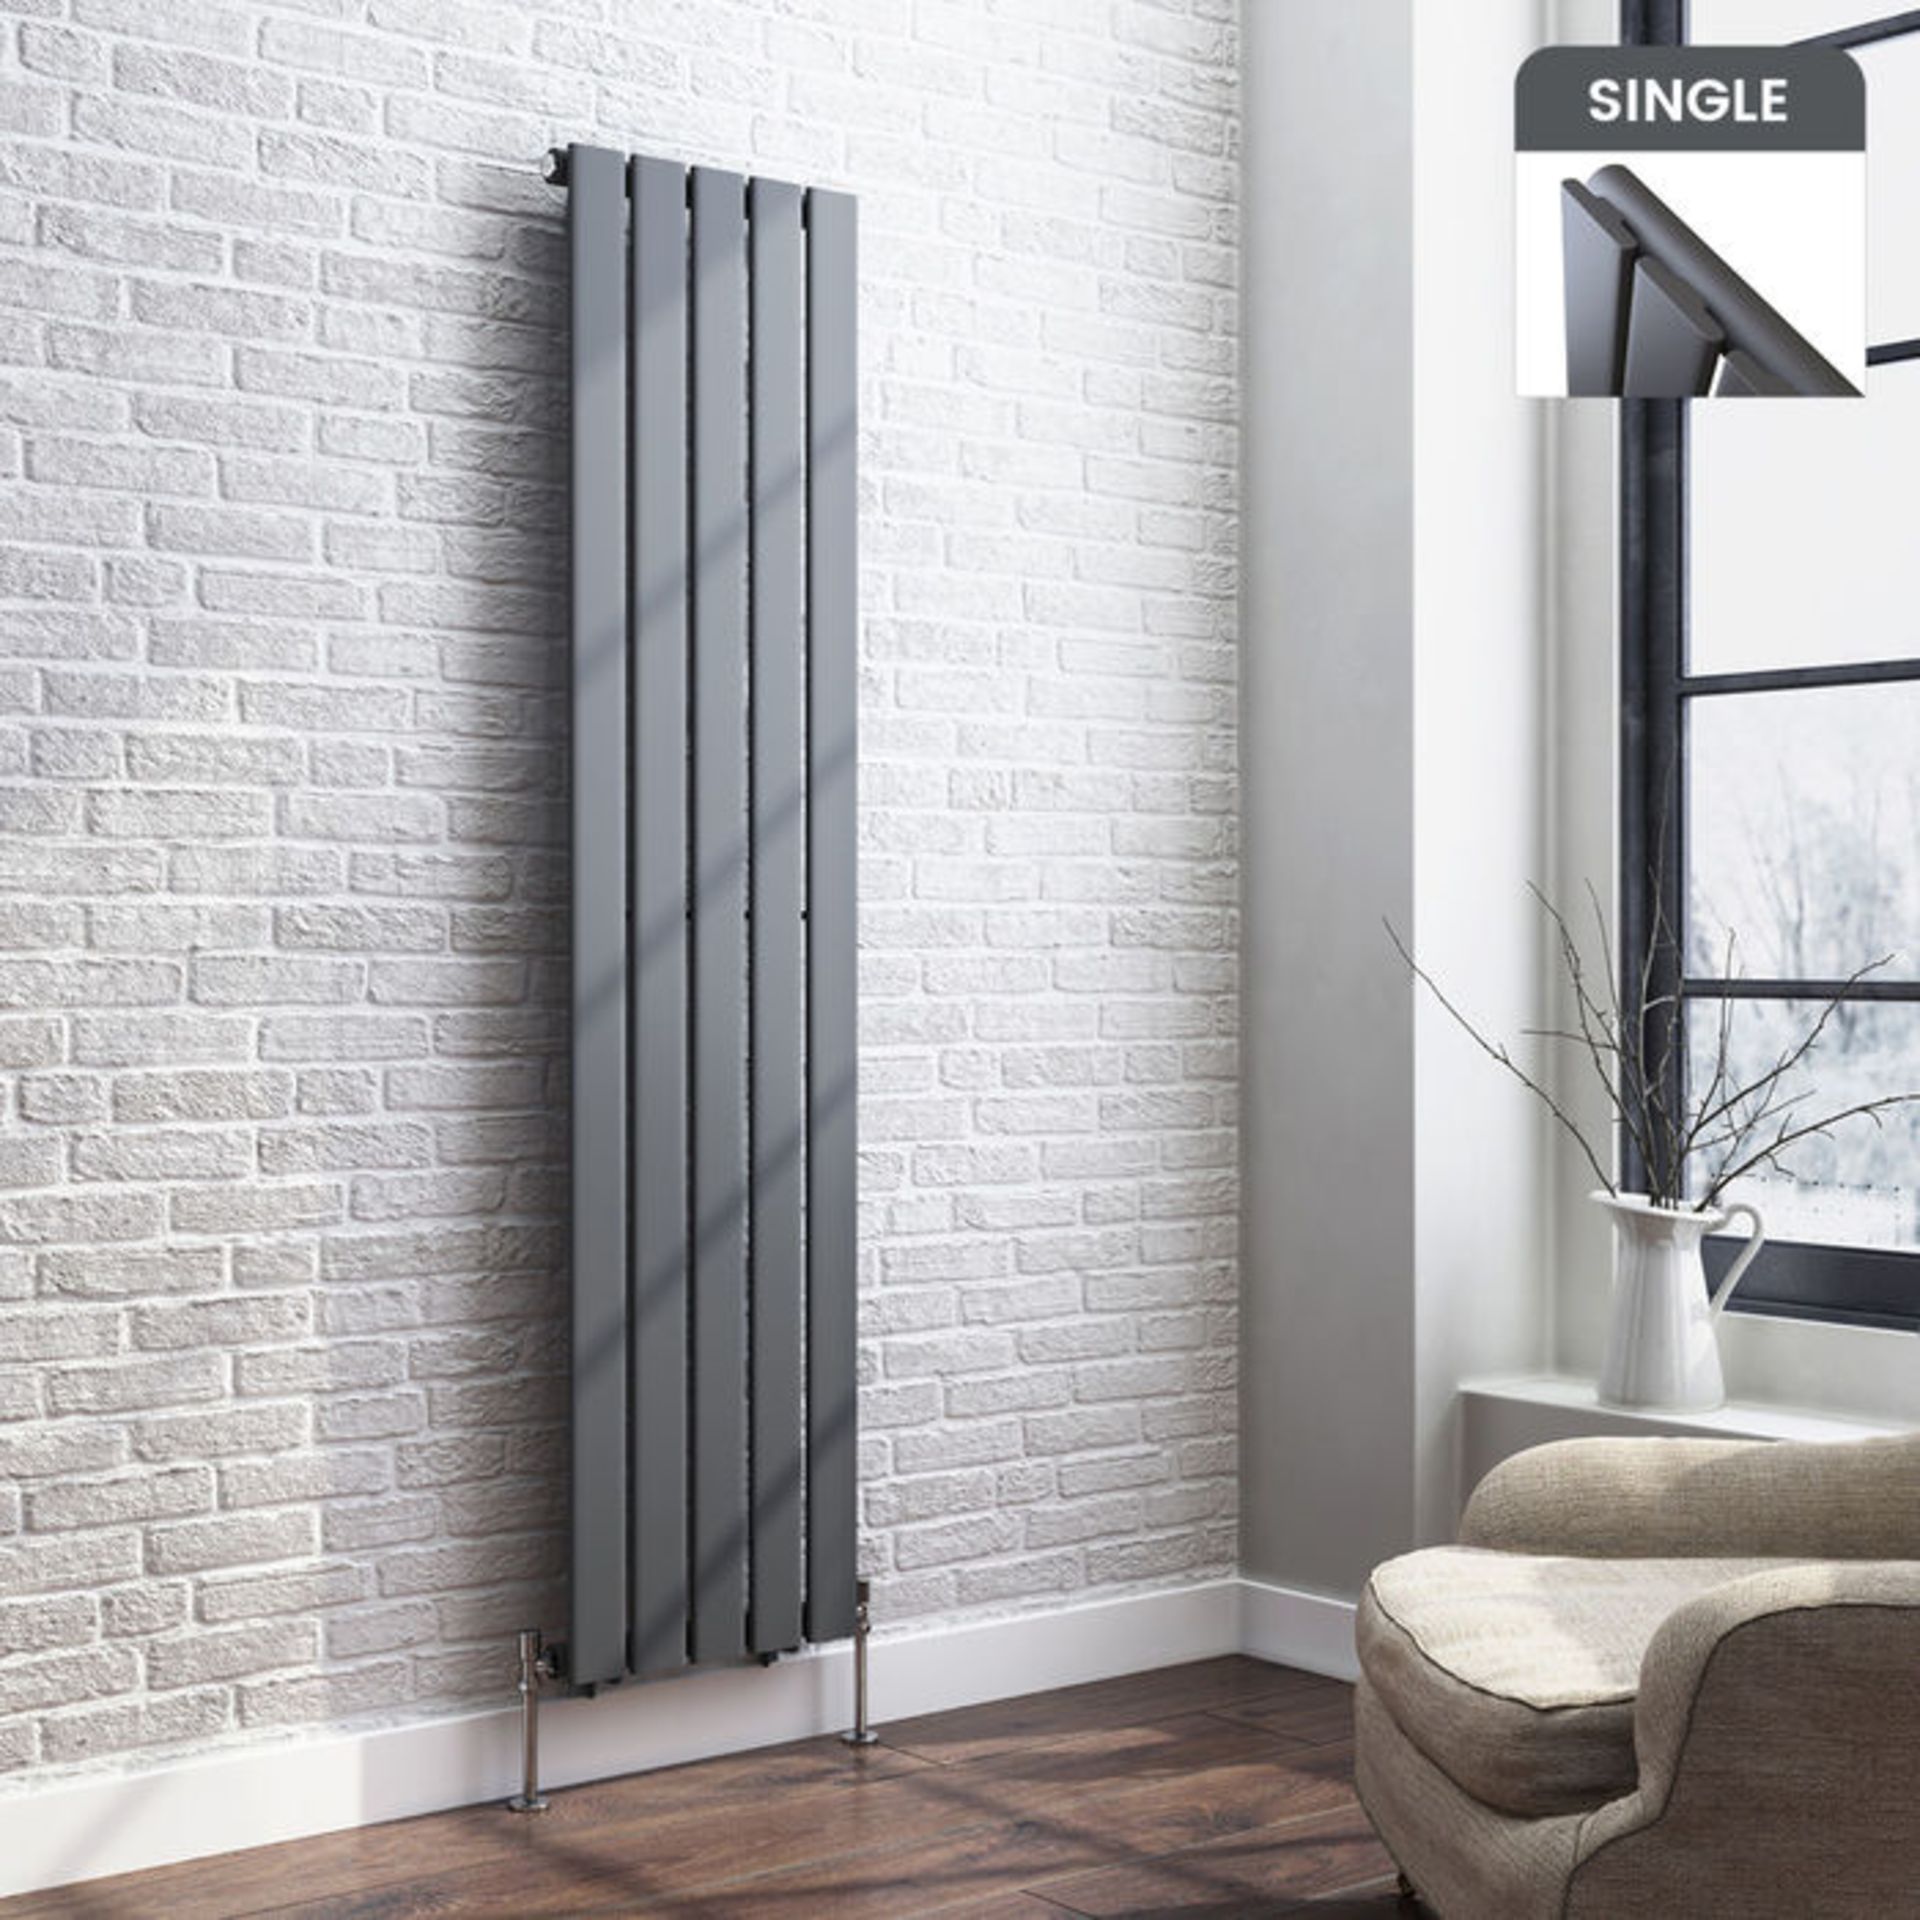 (AL185) 1600x376mm Anthracite Single Flat Panel Vertical Radiator. RRP £349.99. Made from low carbon